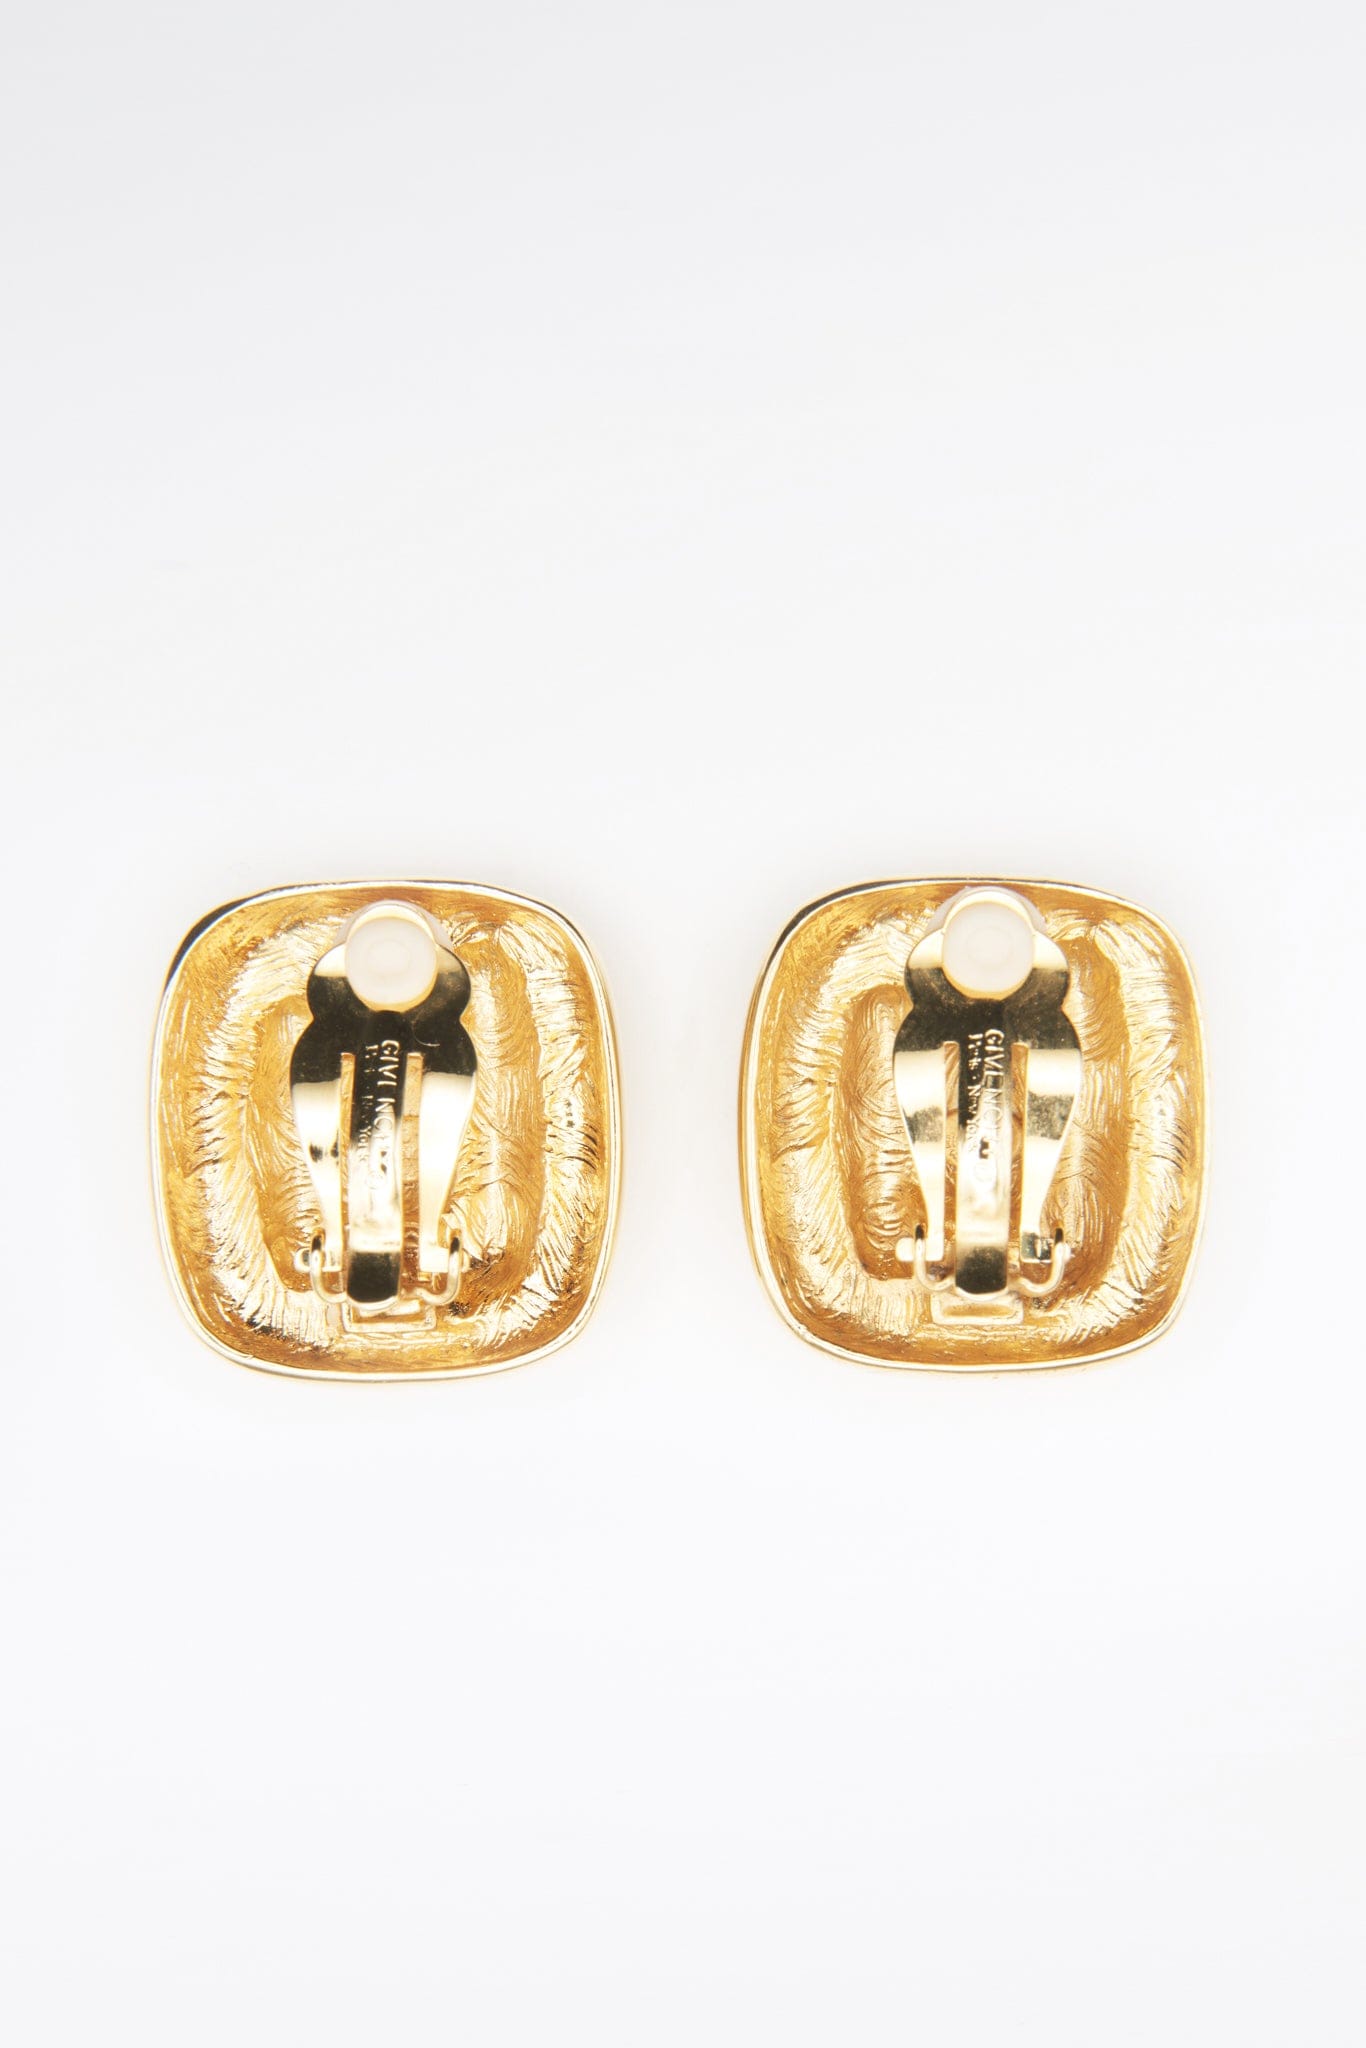 Vintage Gold Givenchy Earrings 1735